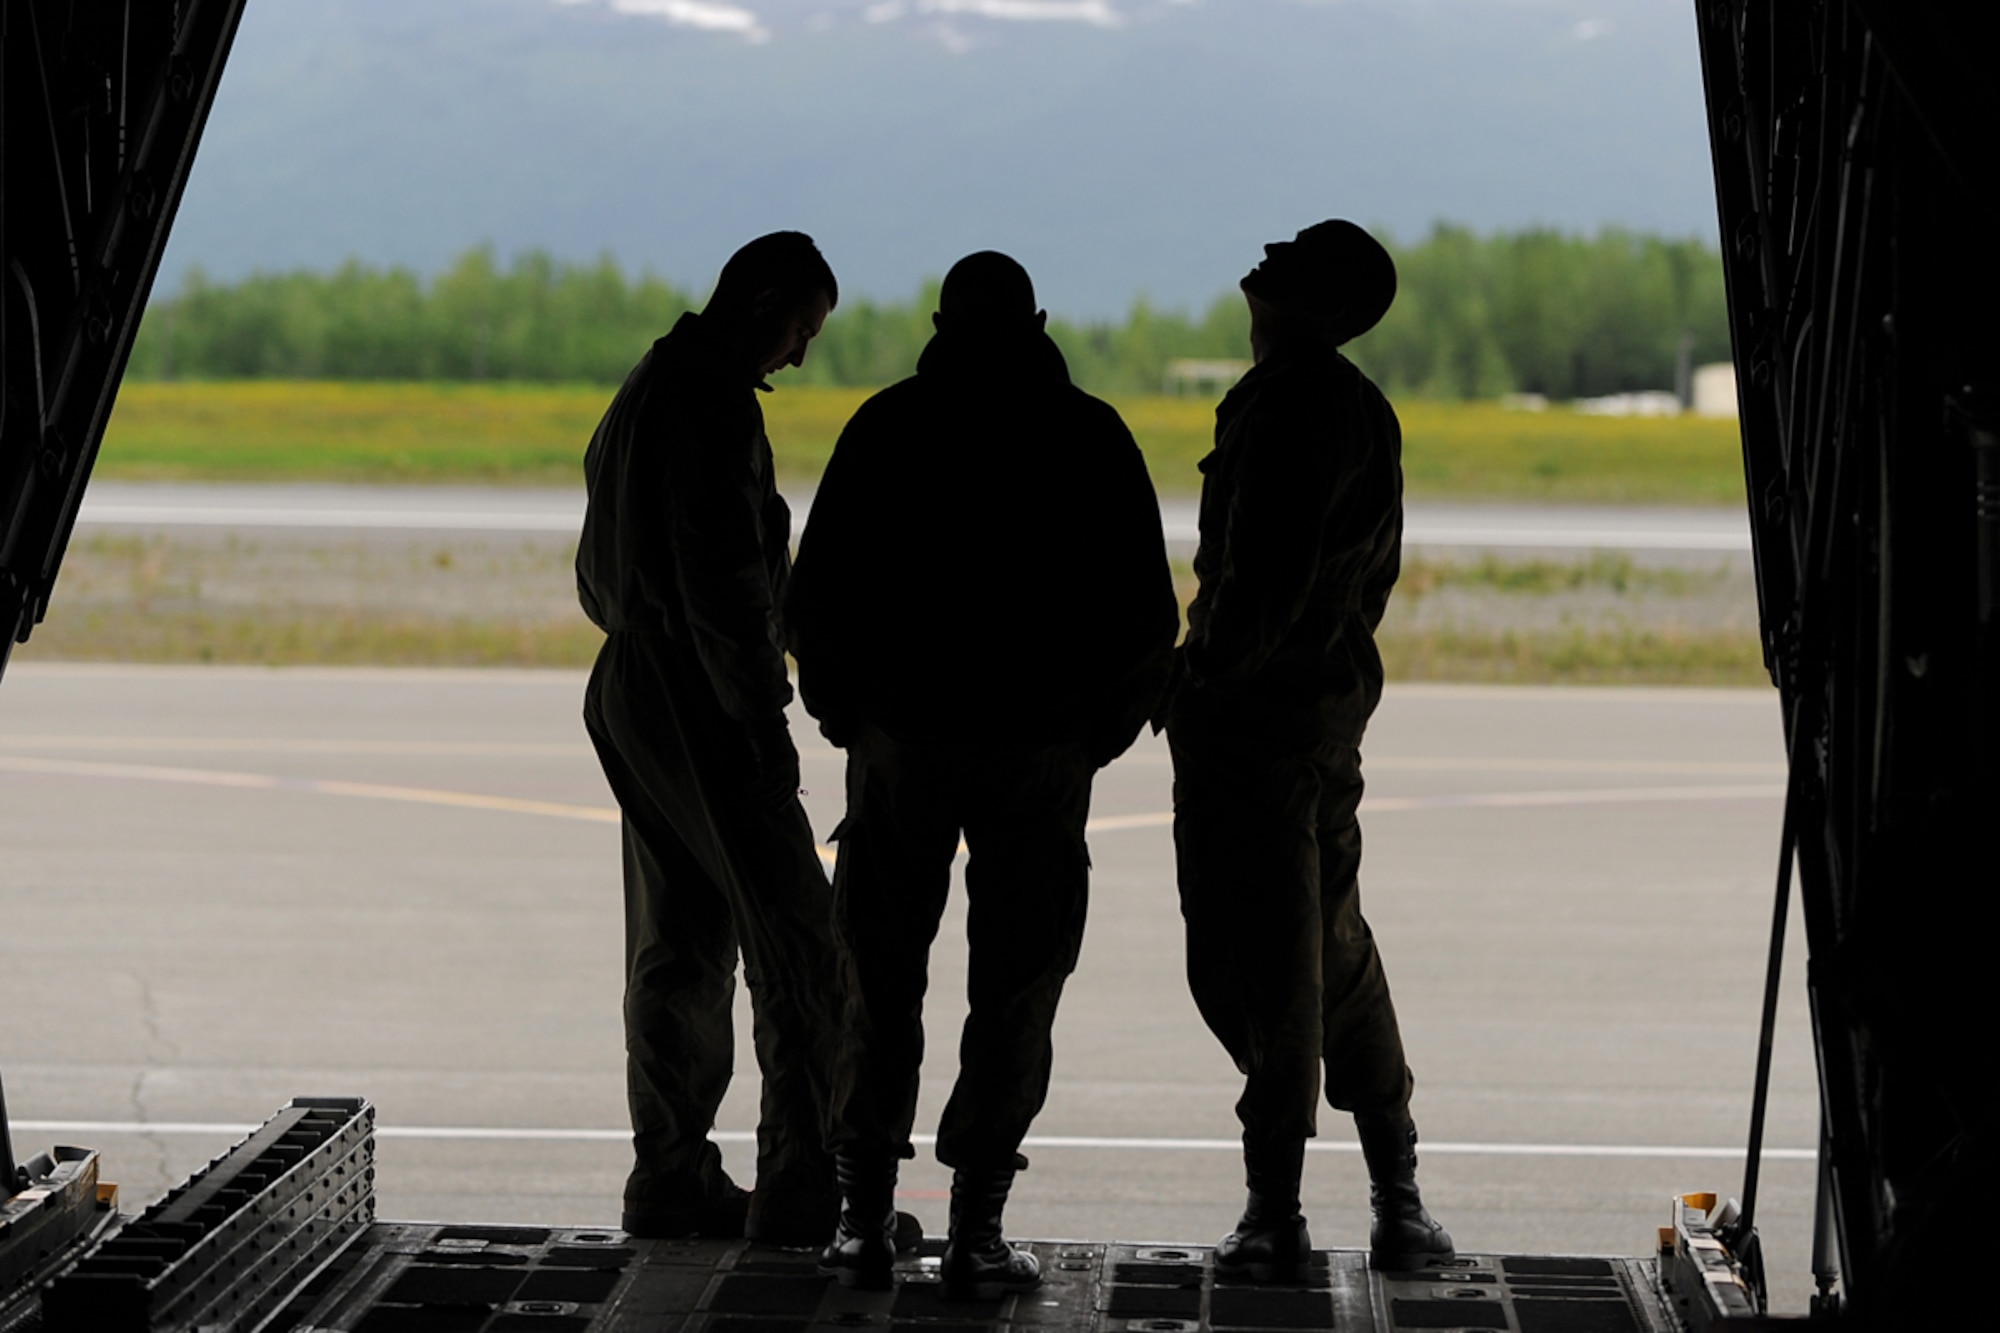 Members of the Polish Air Force C-130 Hercules crew inspect the aircraft during Red Flag-Alaska on Joint Base Elmendorf-Richardson June 13, 2012. The goal of Red Flag-Alaska is to provide each aircrew with vital first missions to increase their chances of survival in combat environments. (U.S. Air Force photo/Airman 1st Class Austin Willhoit)